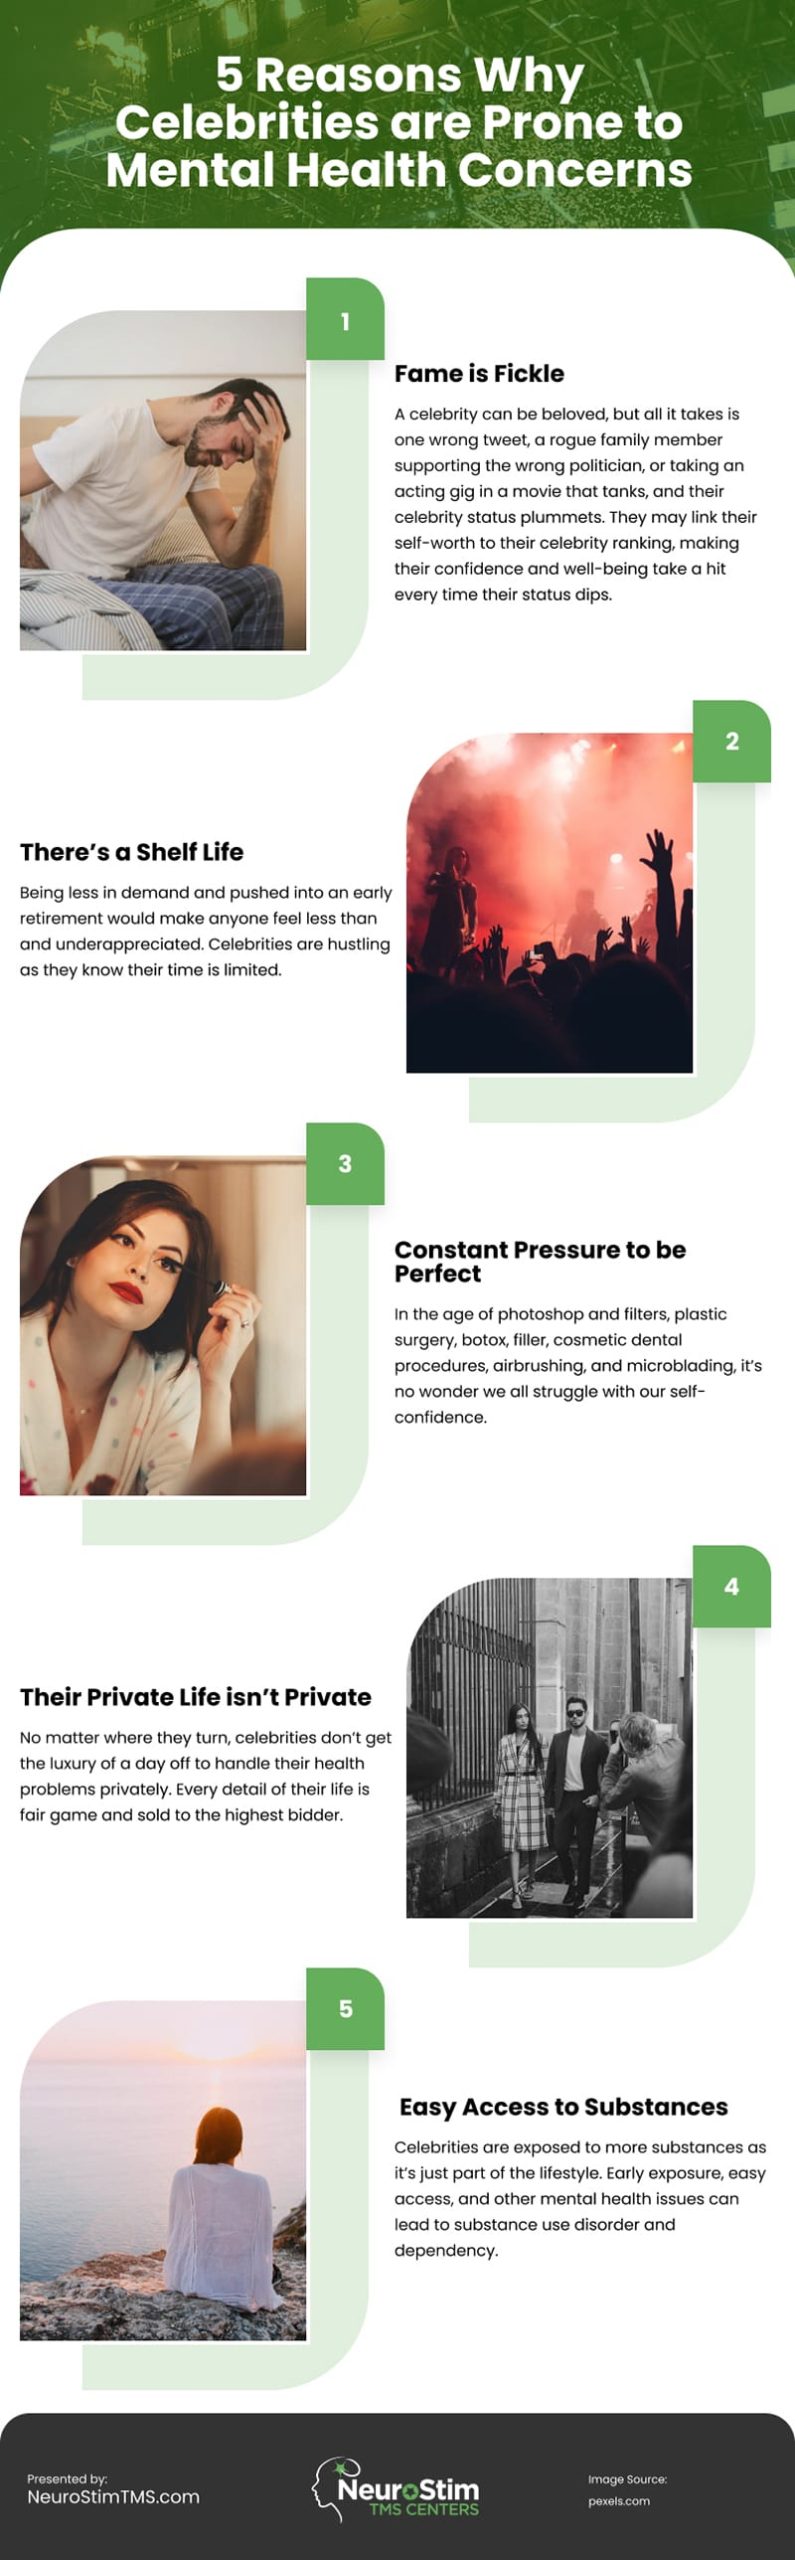 5 Reasons Why Celebrities are Prone to Mental Health Concerns Infographic